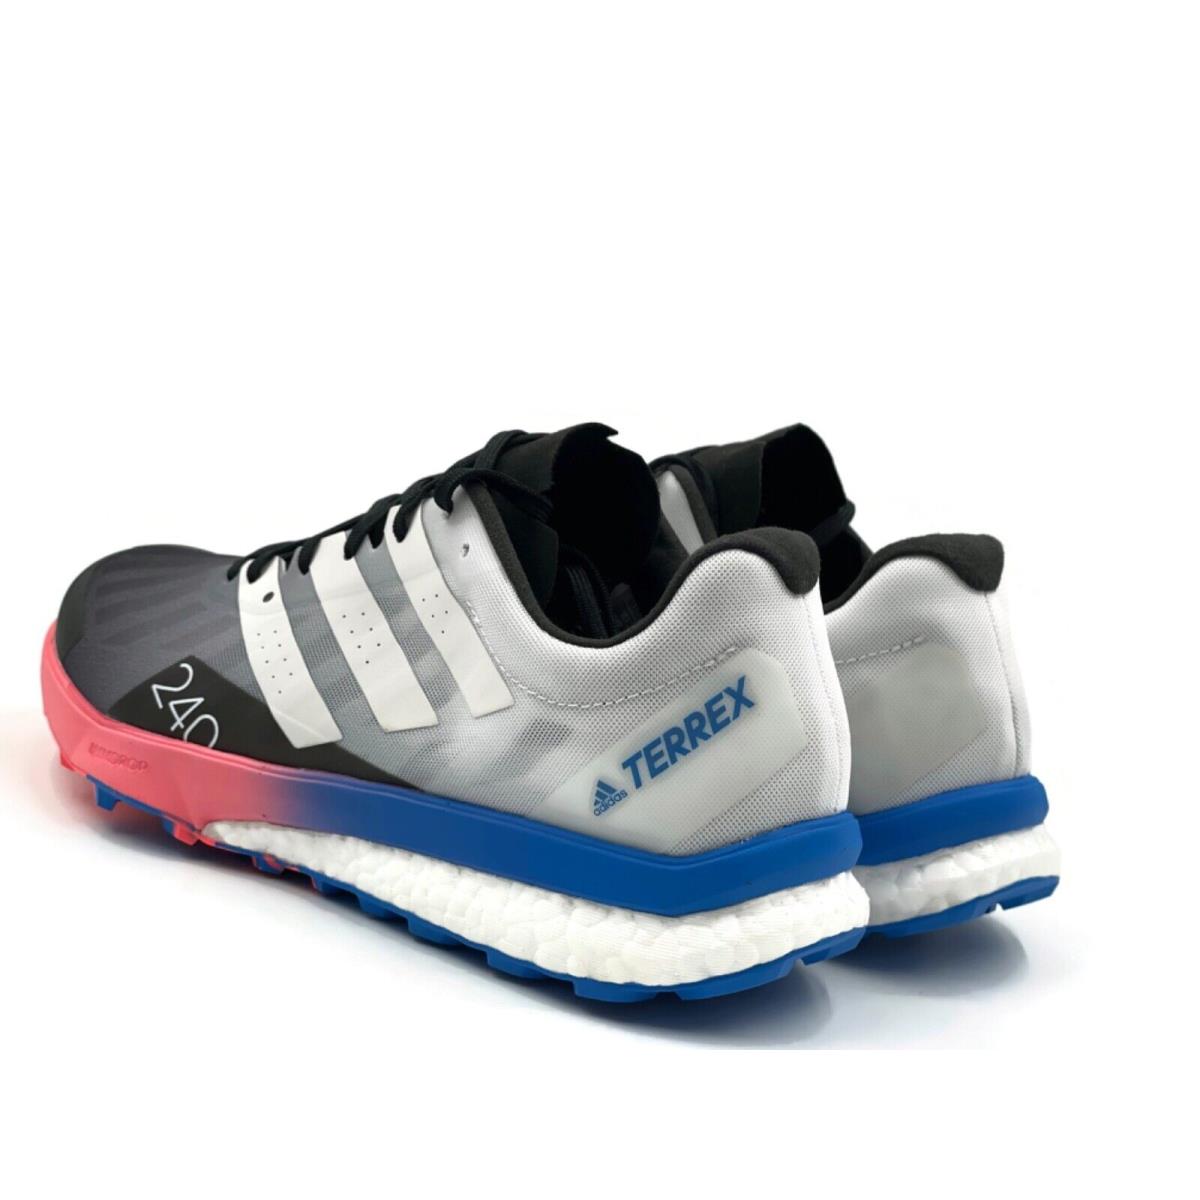 Adidas shoes TERREX Speed Ultra - Multicolor White Blue Red Black 5